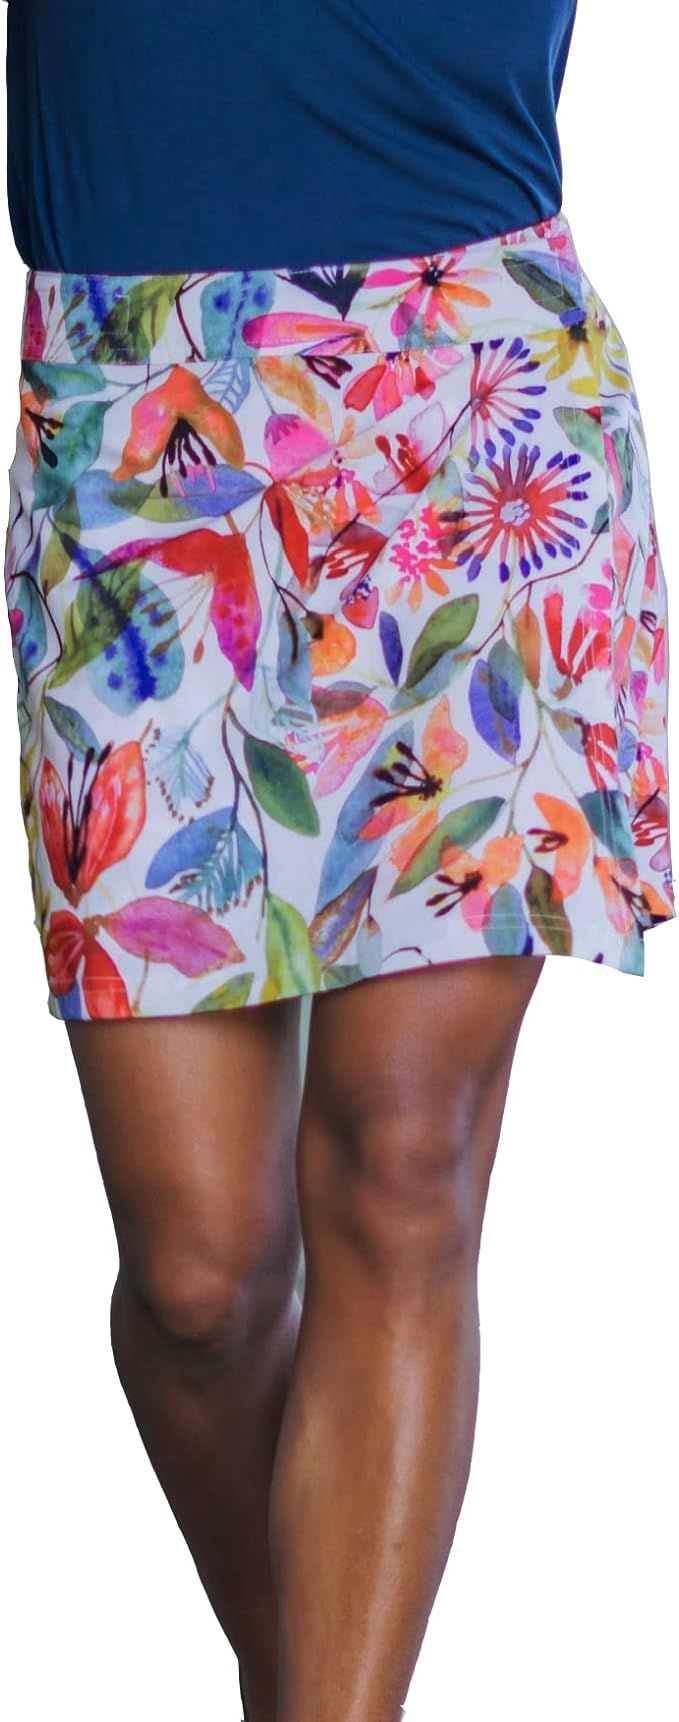 RipSkirt Hawaii - Length 2 - Quick Wrap Cover-up That Multitasks as The Perfect Travel/Summer Ski... | Amazon (US)